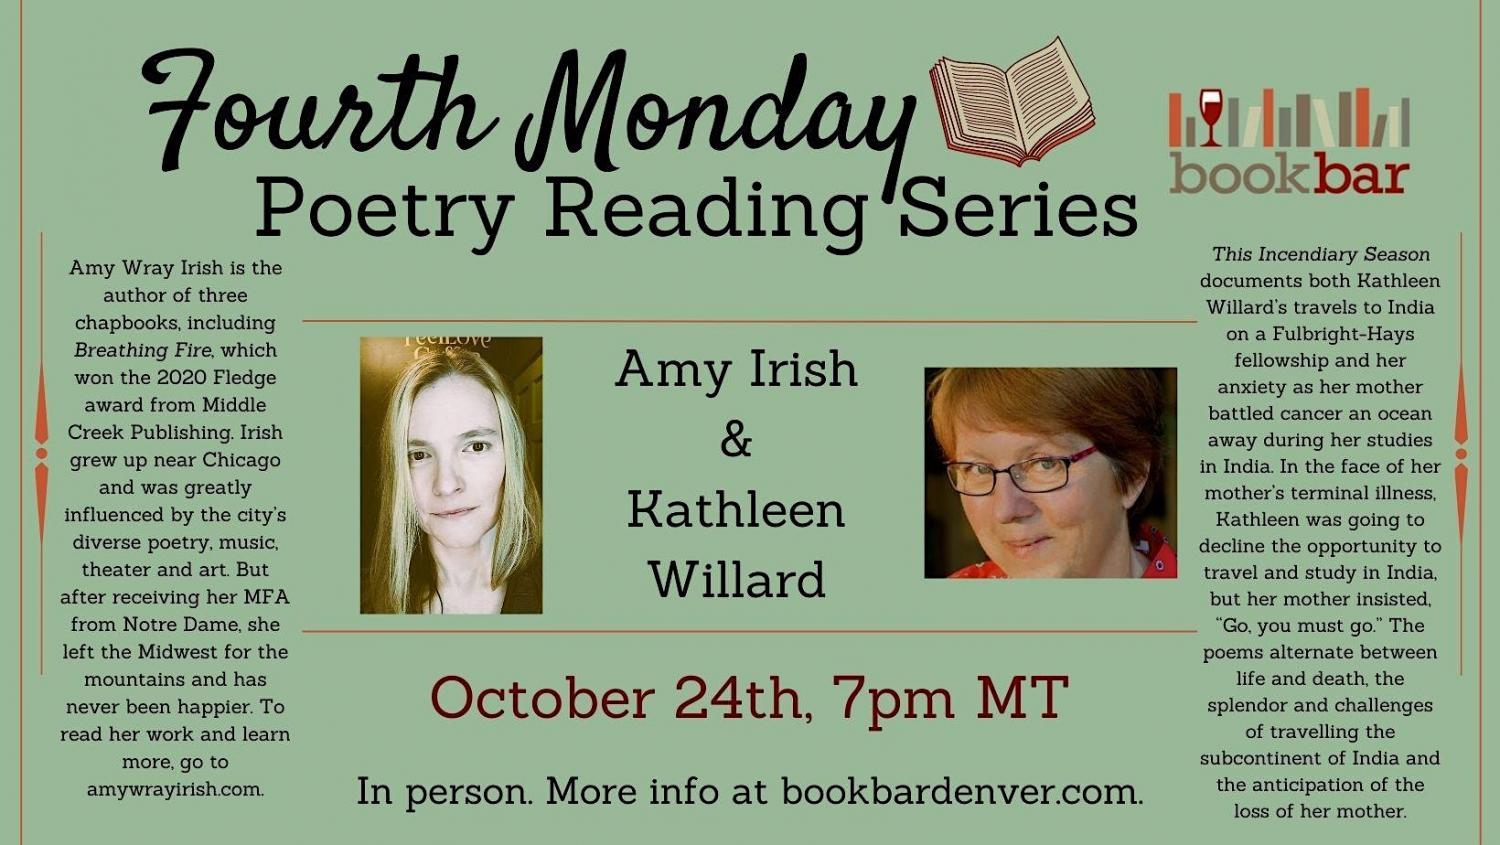 Fourth Monday Poetry Reading
Mon Oct 24, 7:00 PM - Mon Oct 24, 7:00 PM
in 5 days